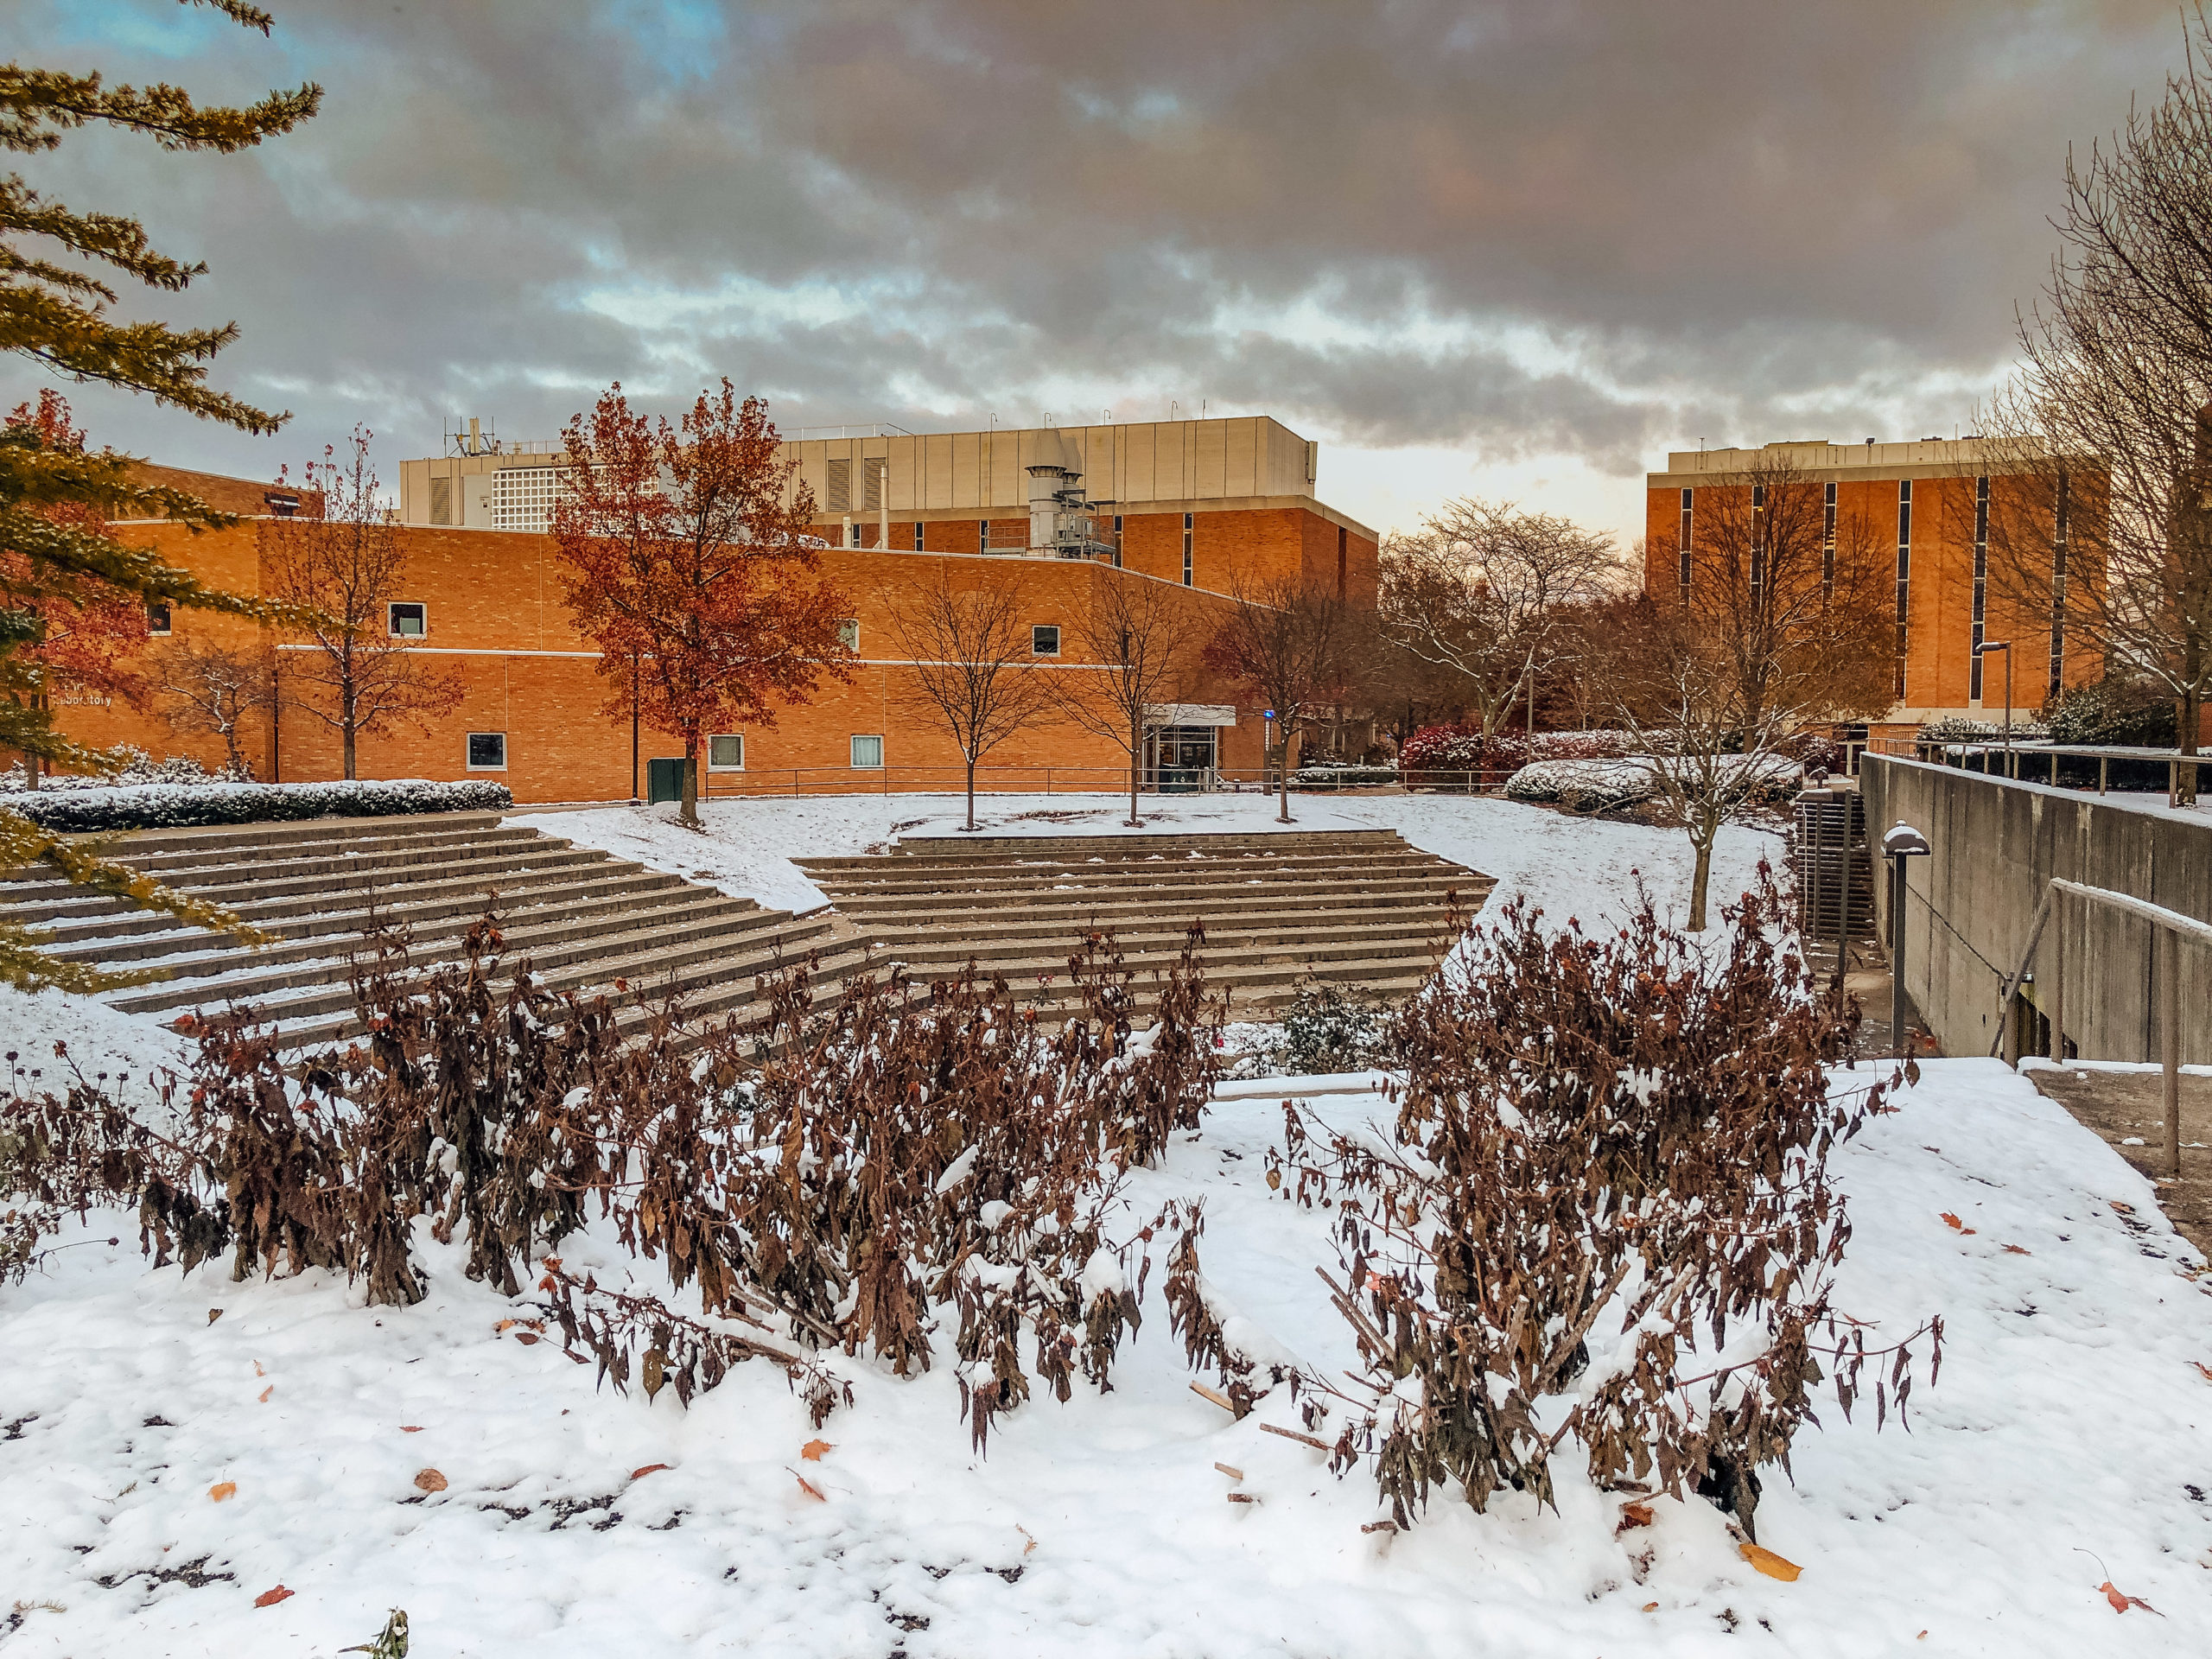 Wright State campus after first snowfall of the season | Photograph by Soham Parikh | The Wright State Guardian